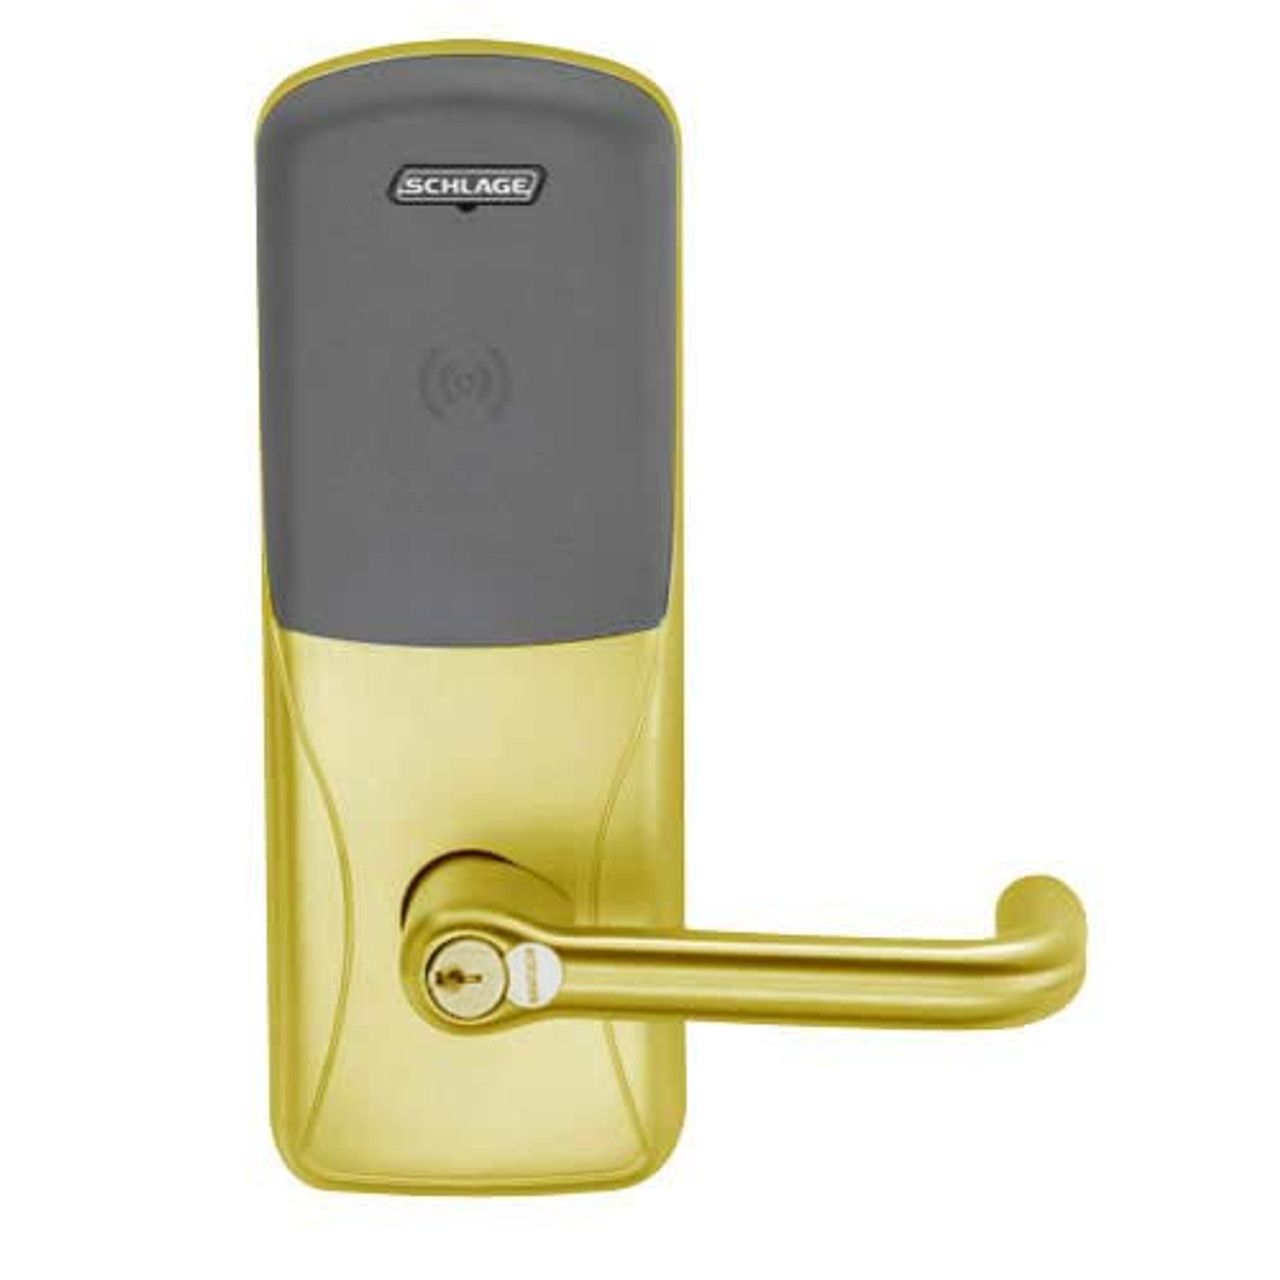 CO200-MD-40-PR-TLR-RD-606 Mortise Deadbolt Standalone Electronic Proximity Locks in Satin Brass